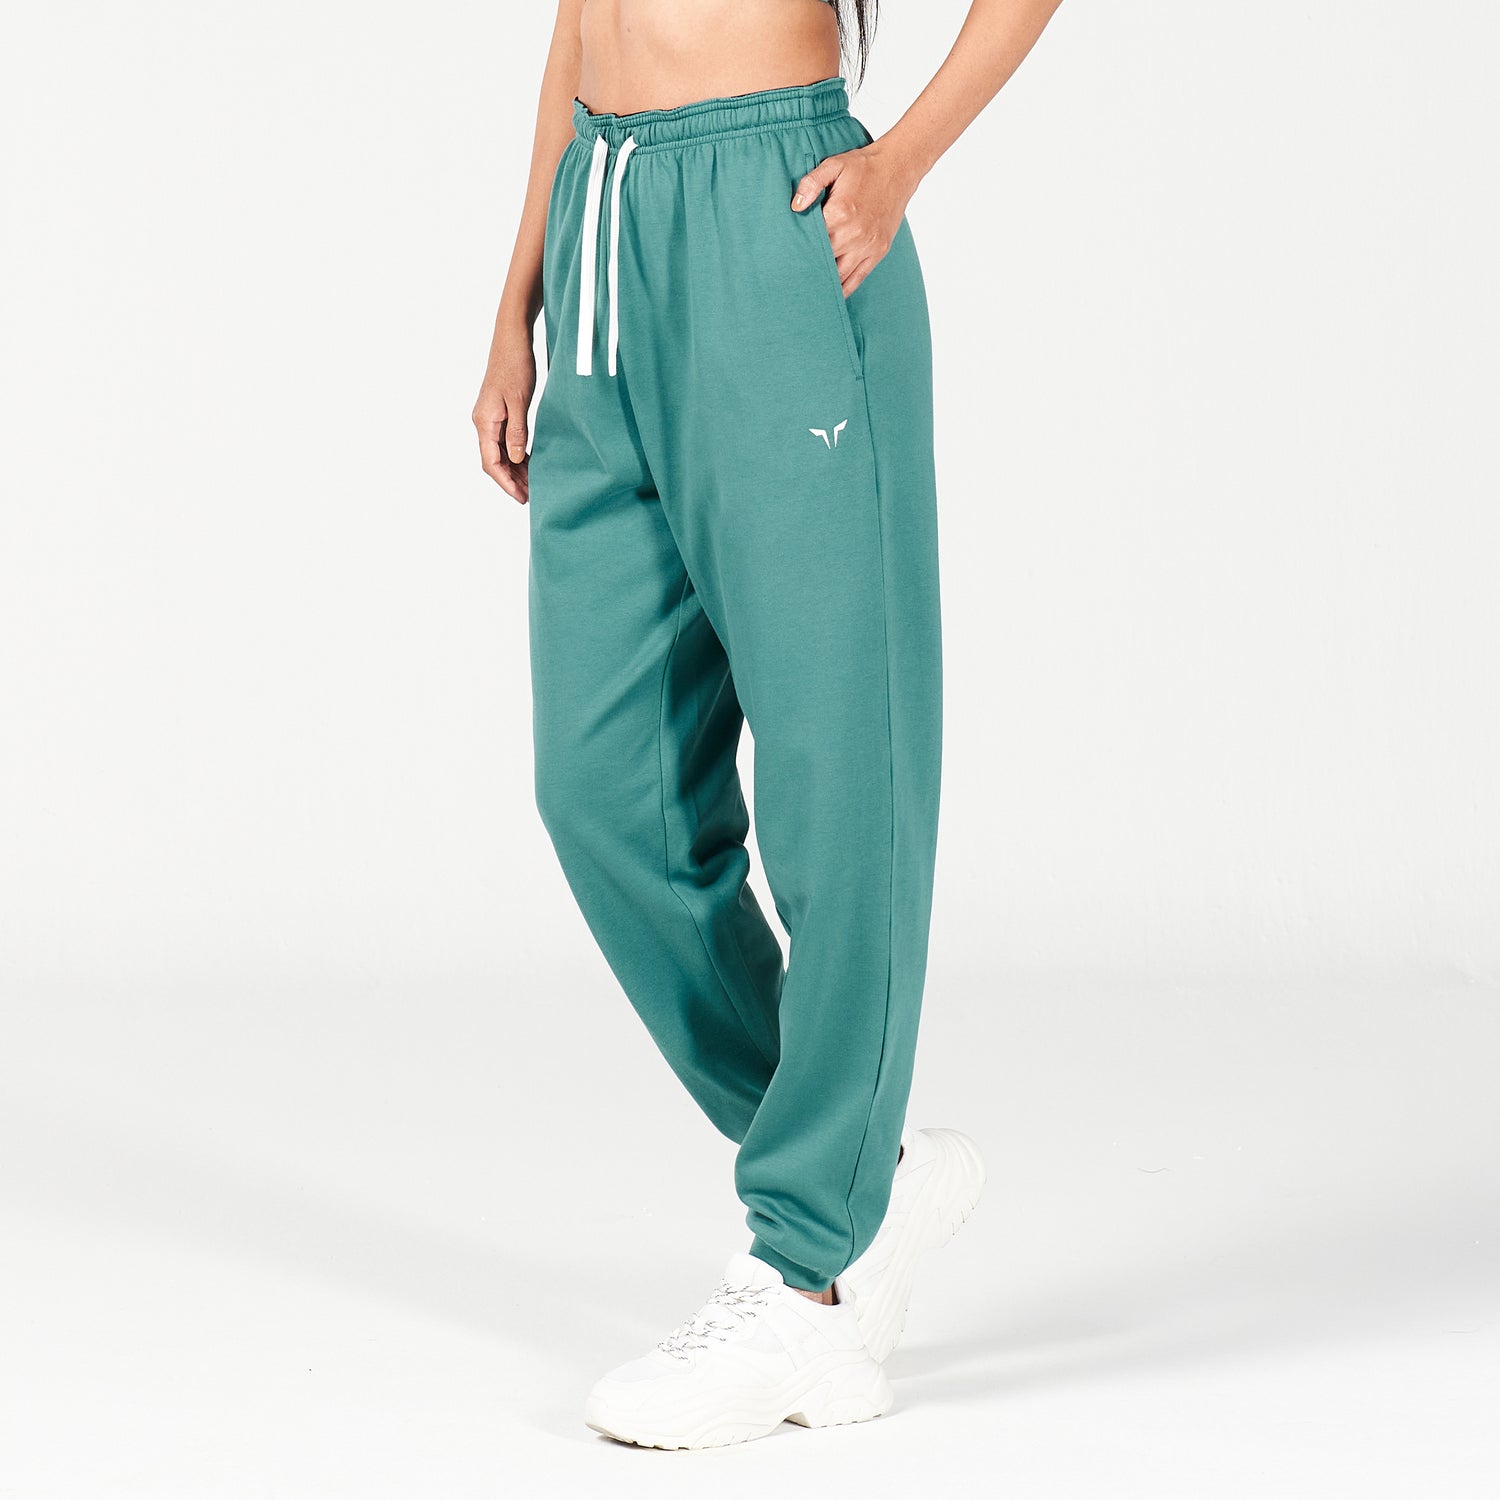 squatwolf-workout-clothes-waistband-surprise-joggers-hydro-gym-pants-for-women